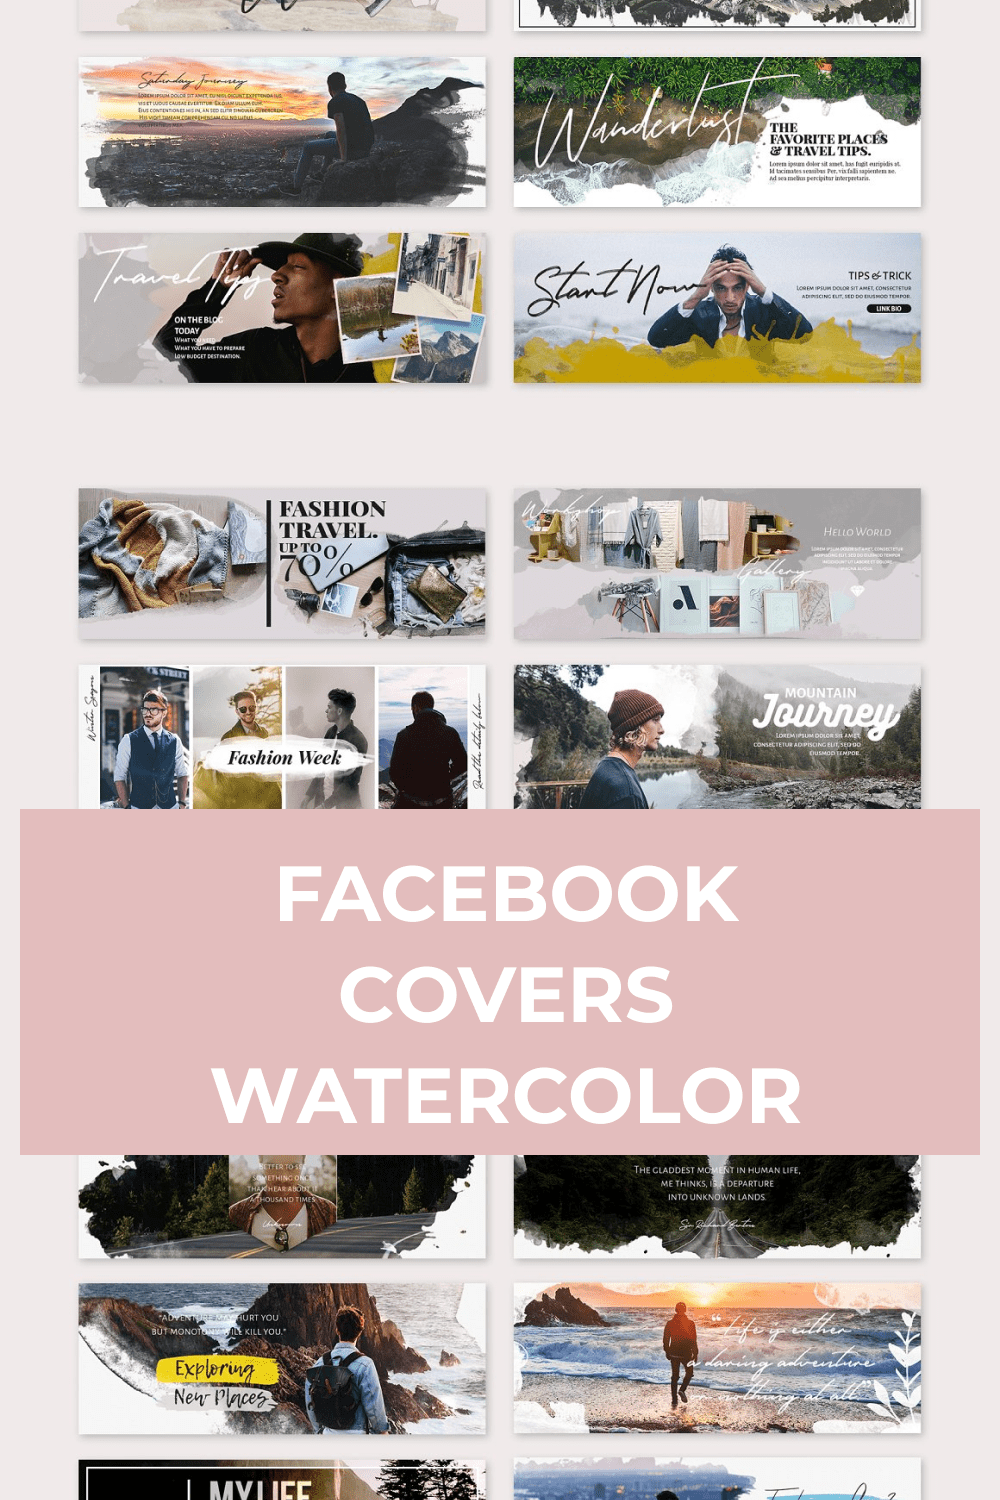 Creative facebook covers in watercolor style.